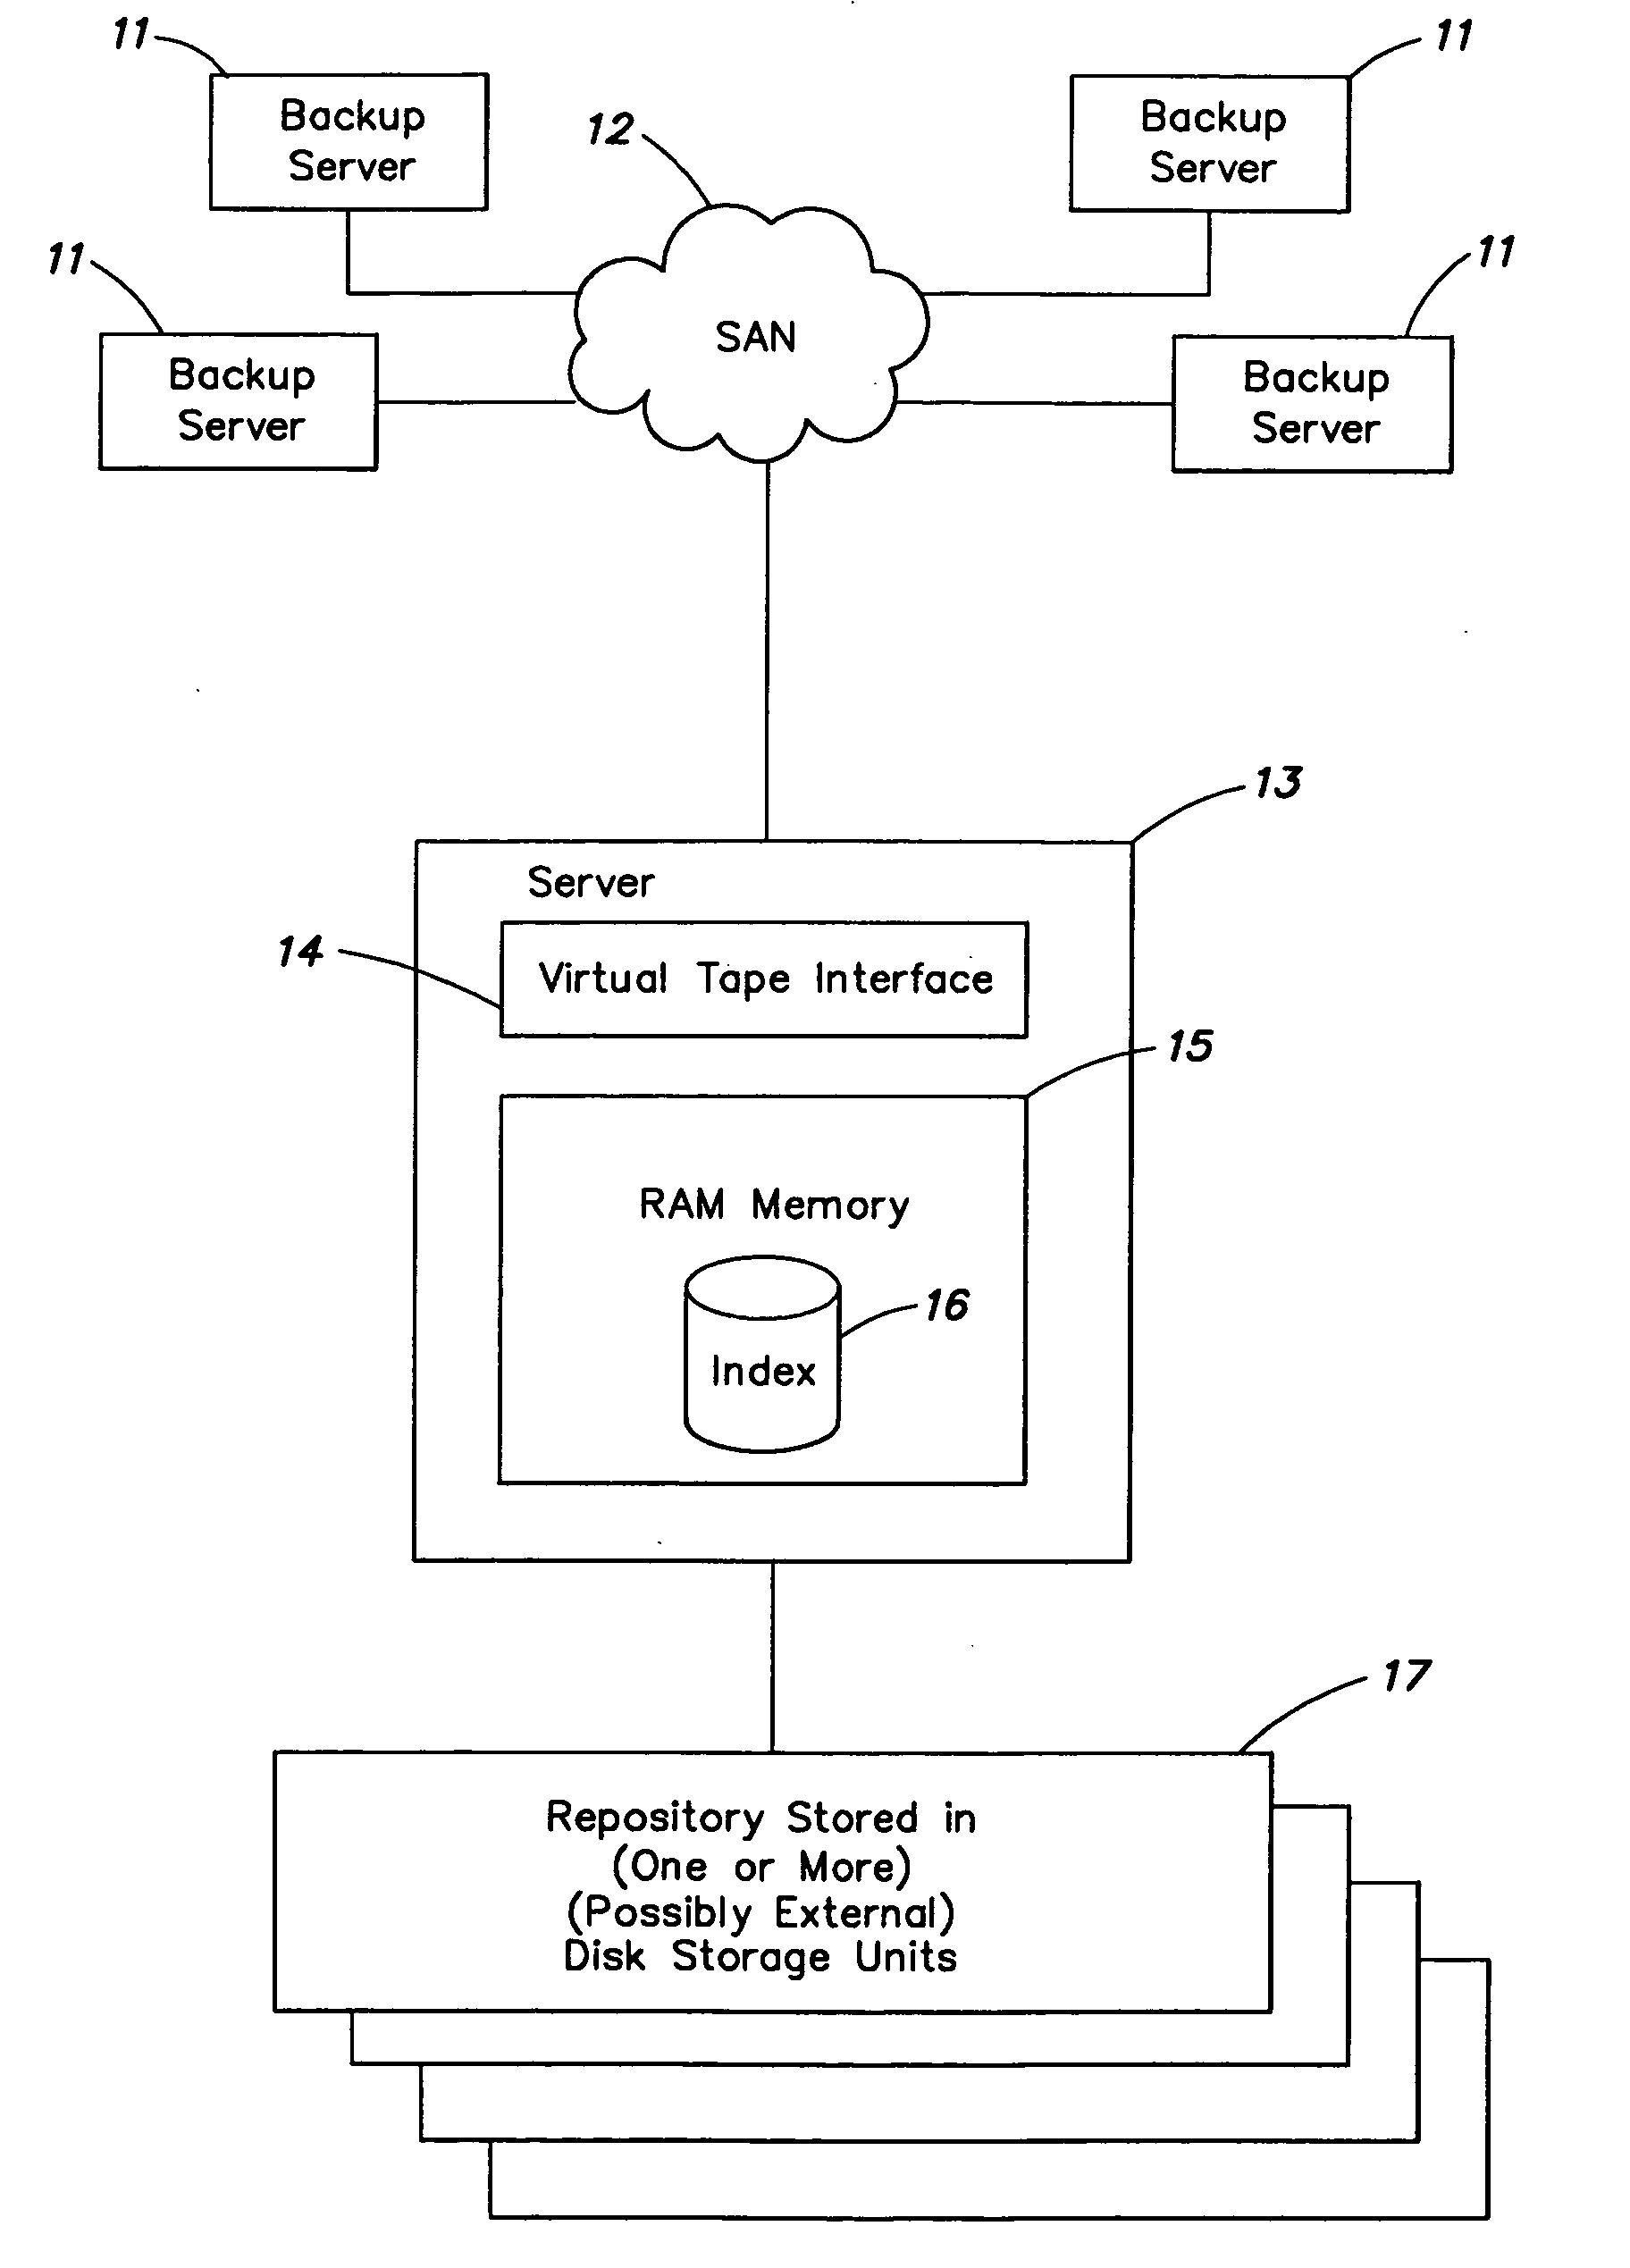 Systems and methods for searching of storage data with reduced bandwidth requirements